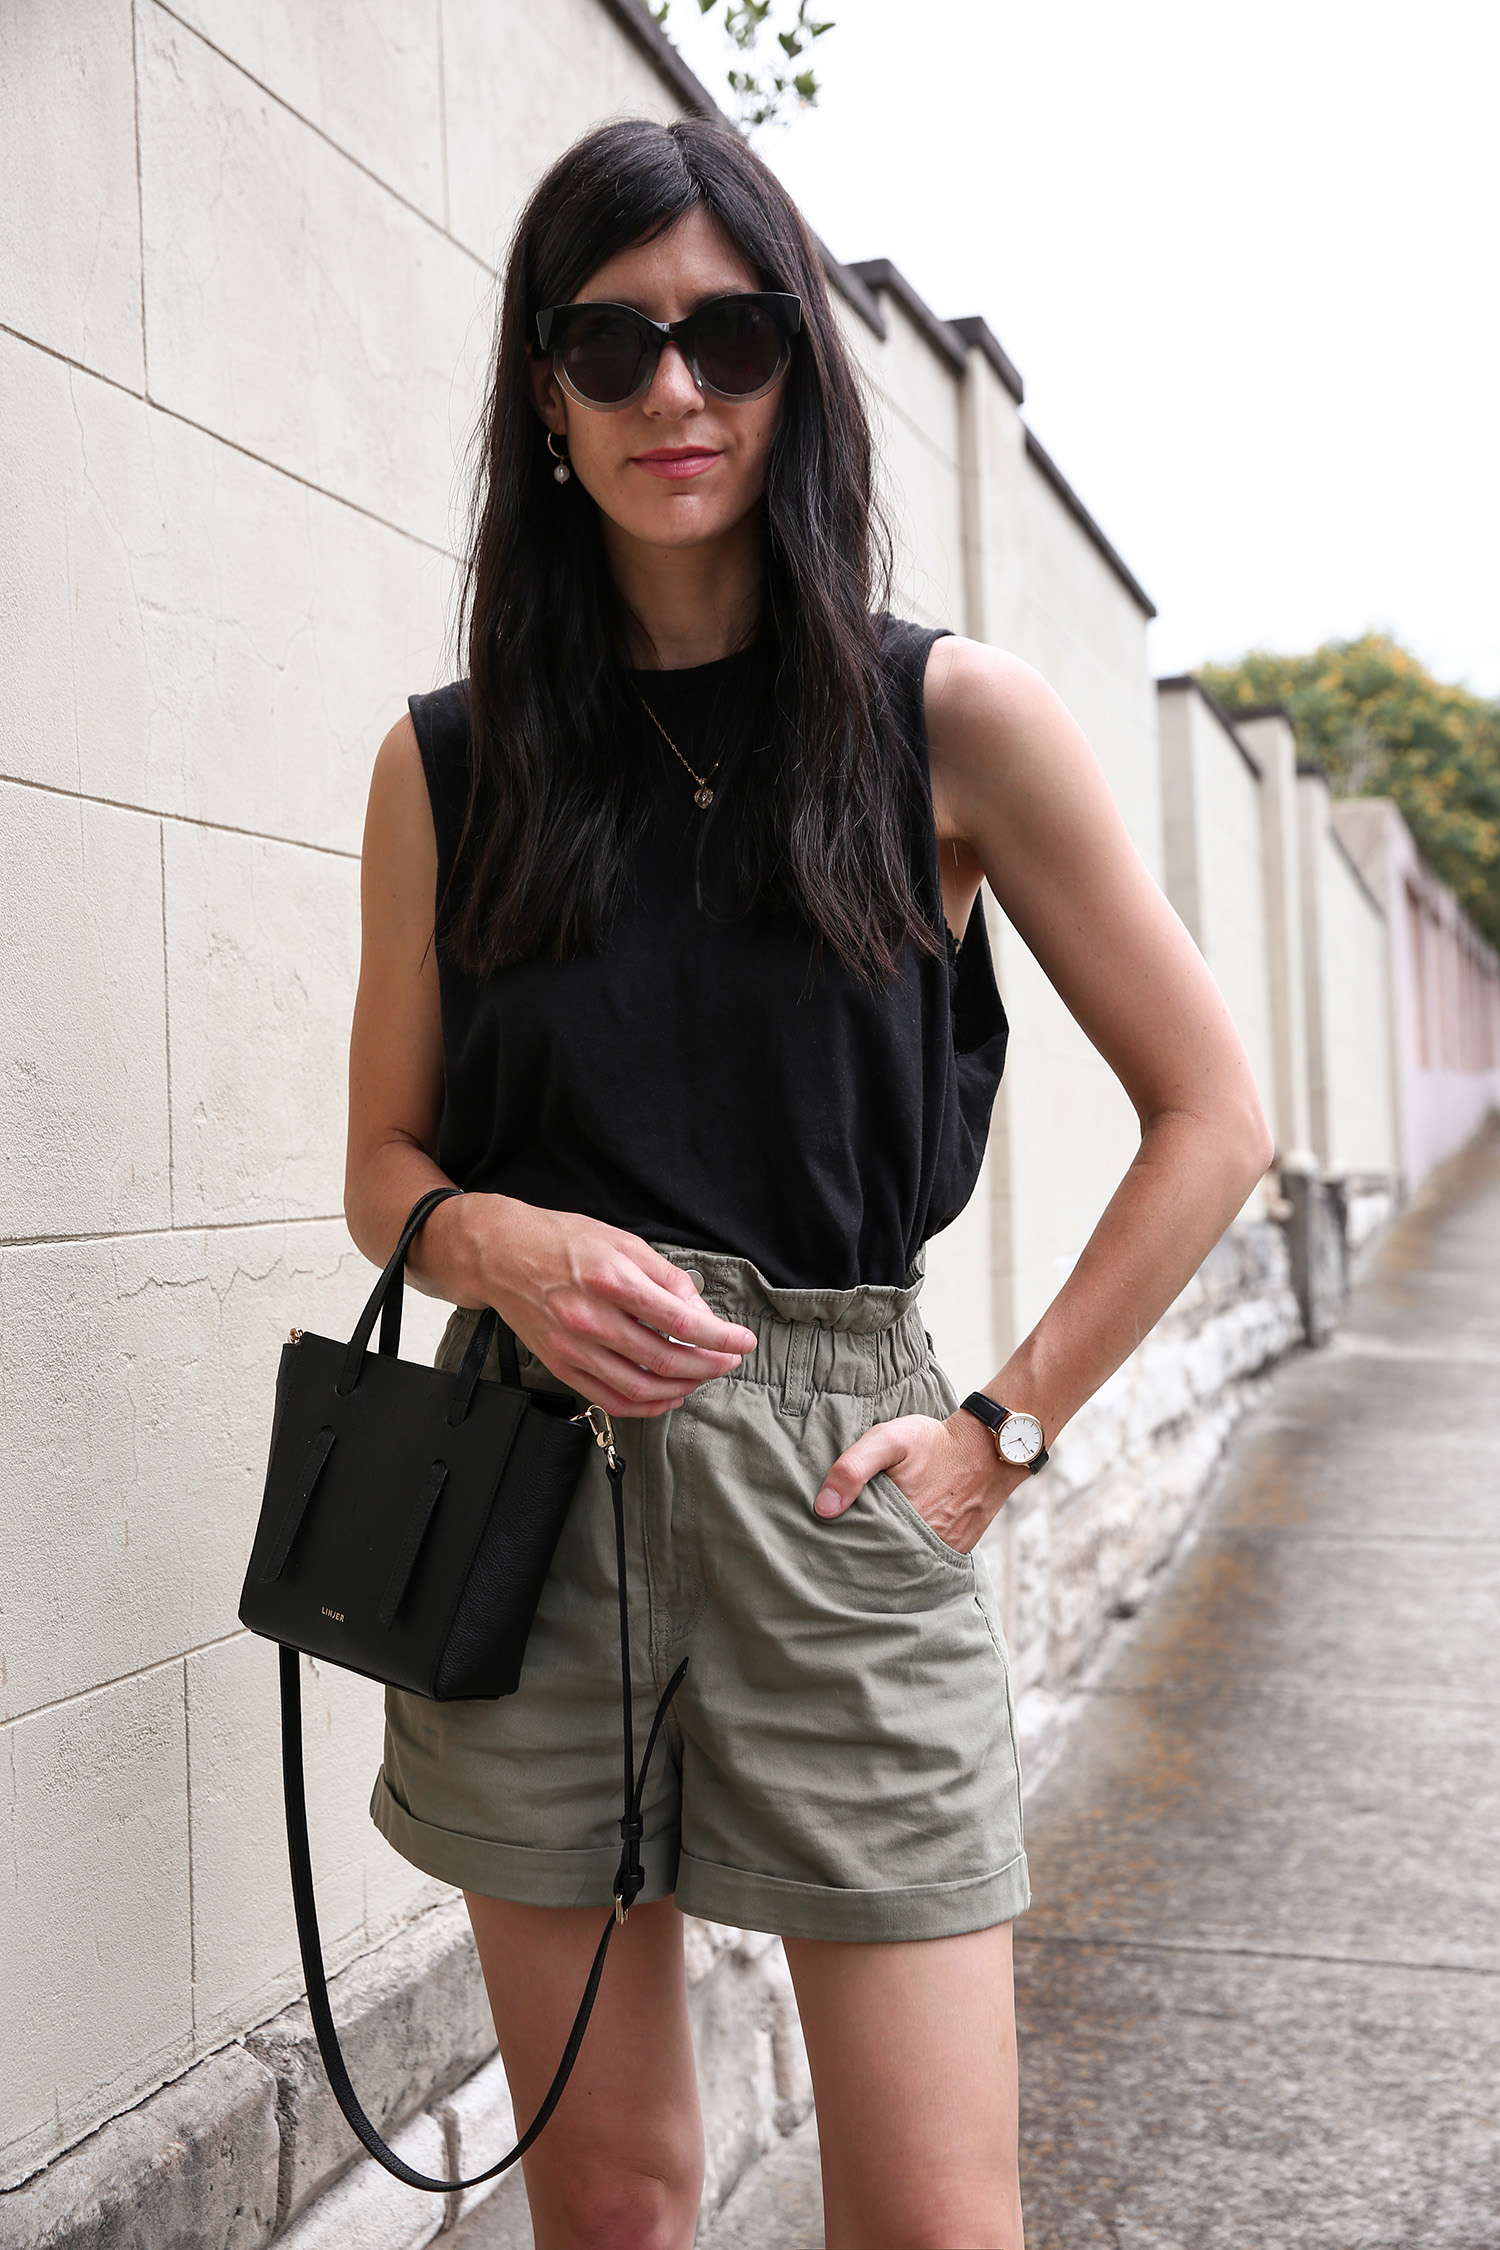 Netural toned outfit minimal style with PORTRAIT Eyewear DAS Model Sunglasses